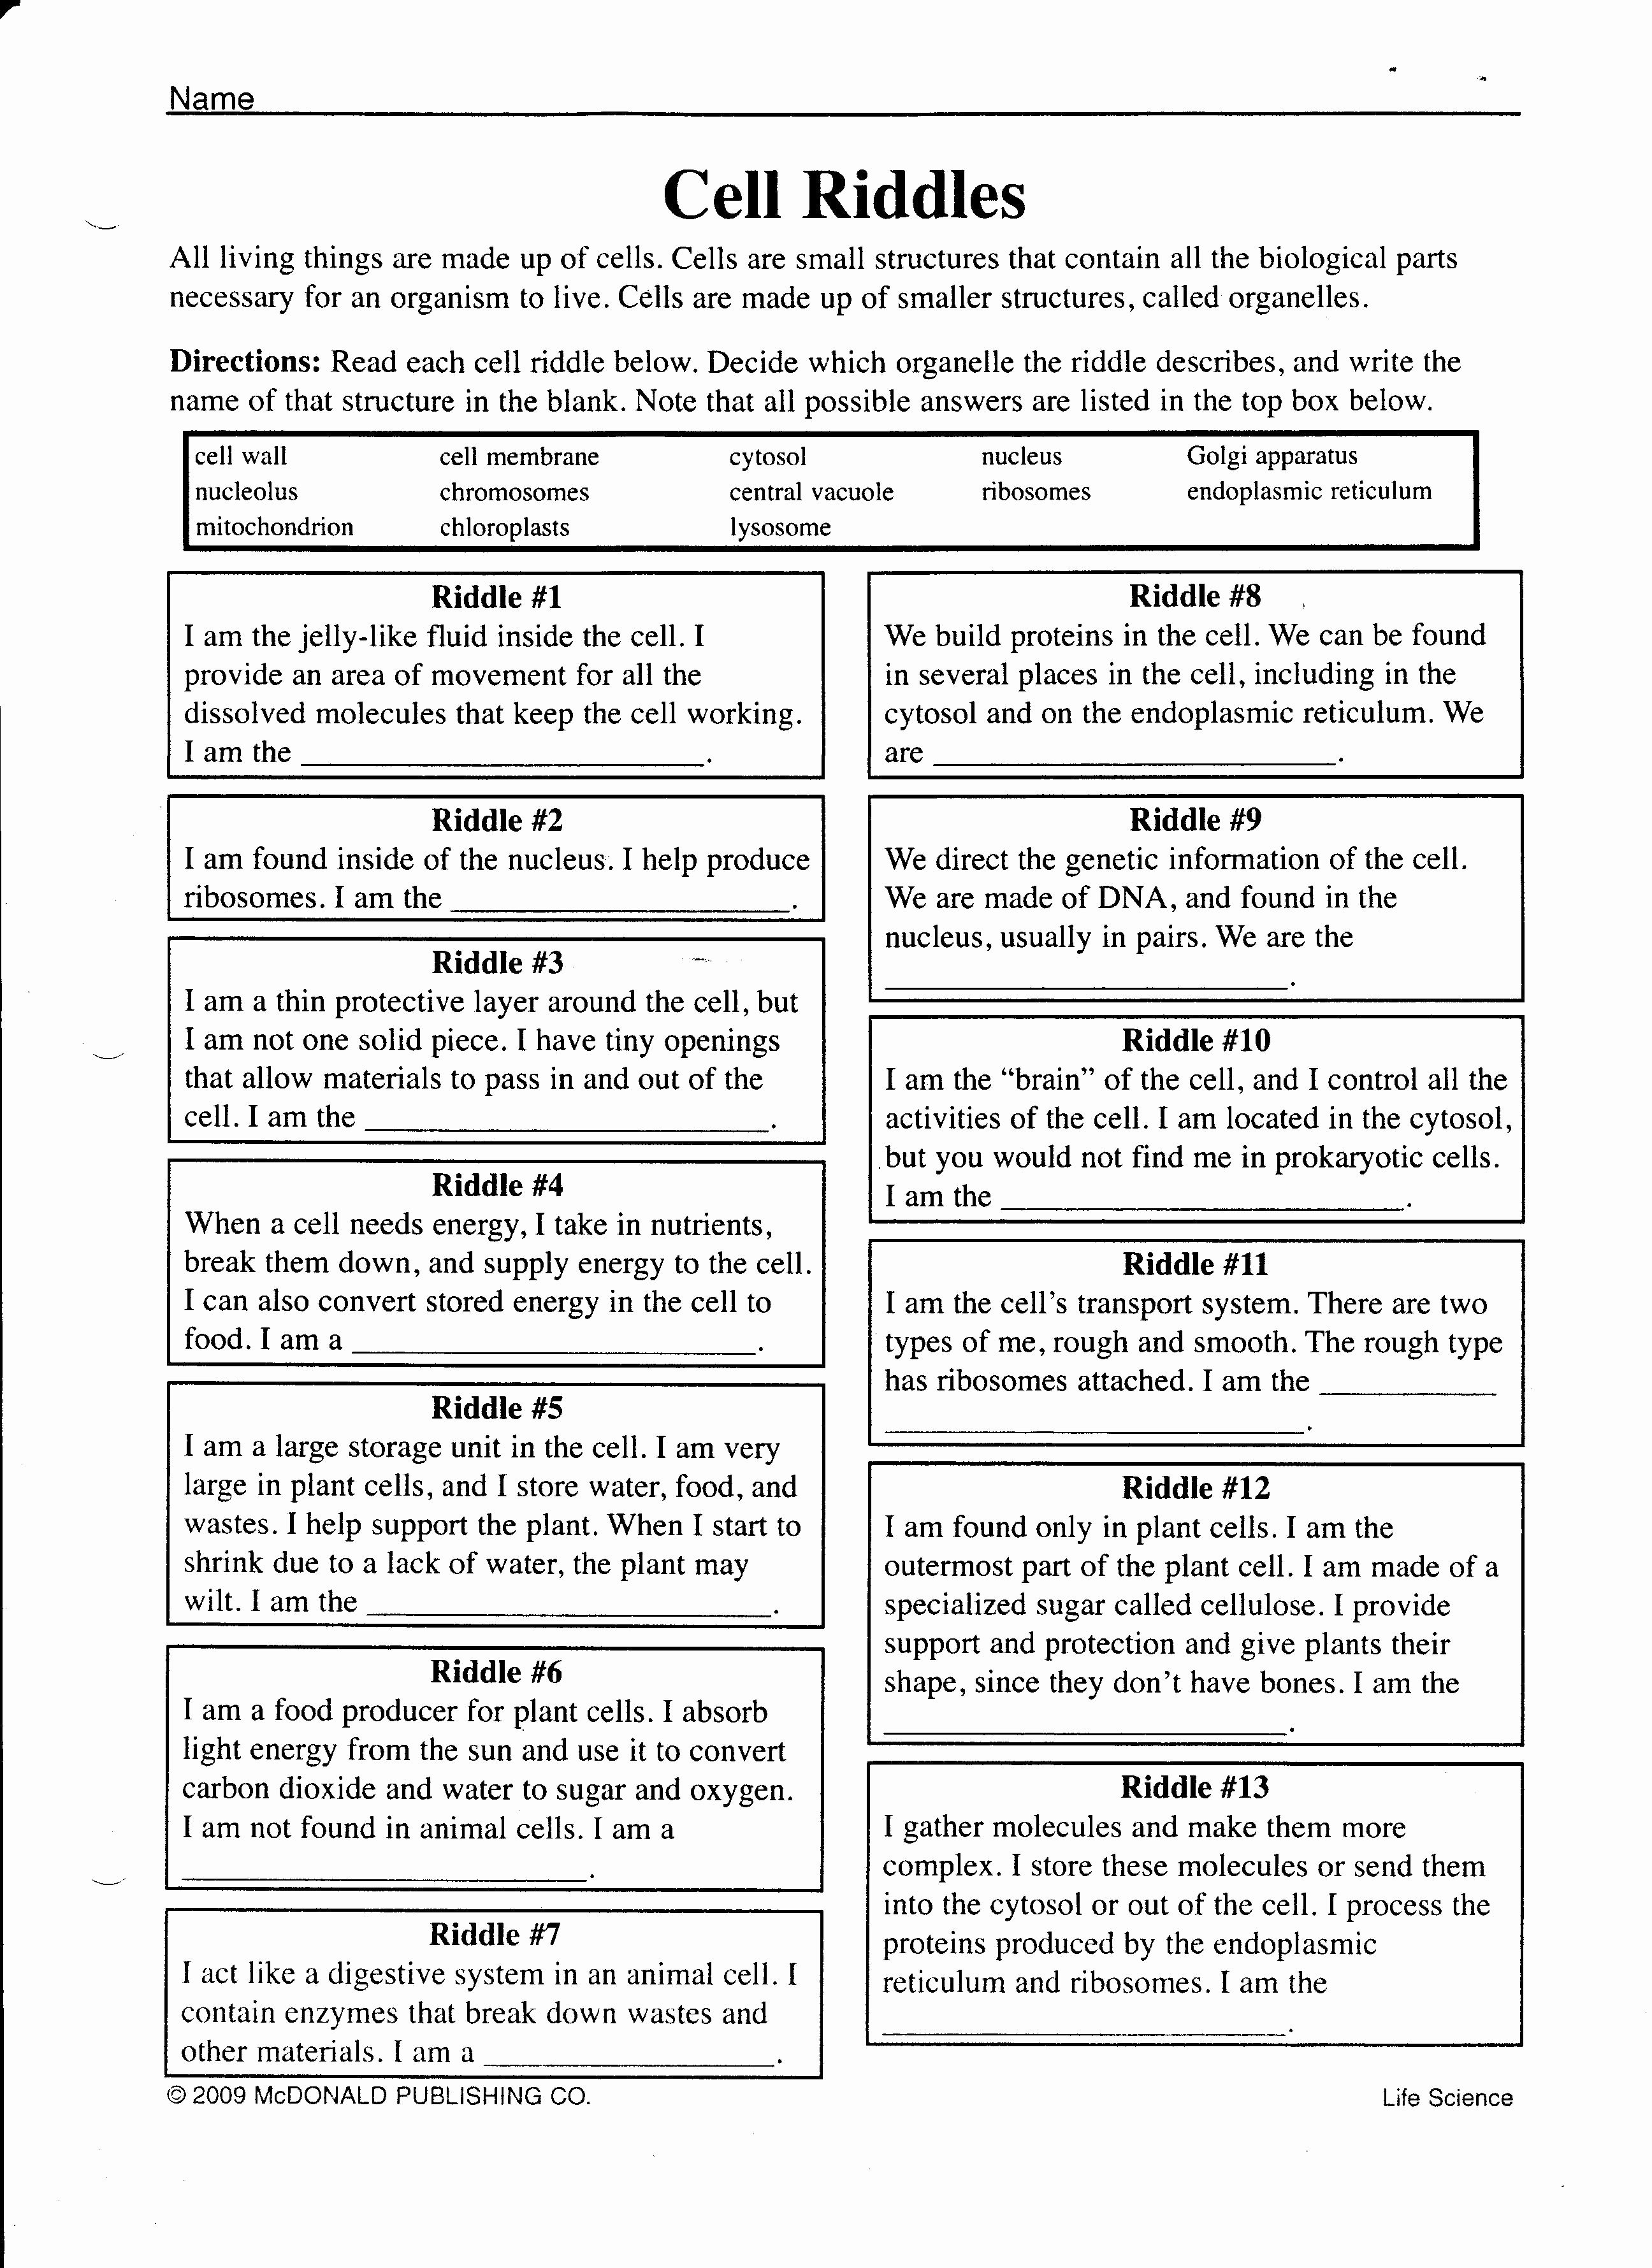 Function Of the organelles Worksheet Lovely Prokaryotic and Eukaryotic Cells Worksheet Answers